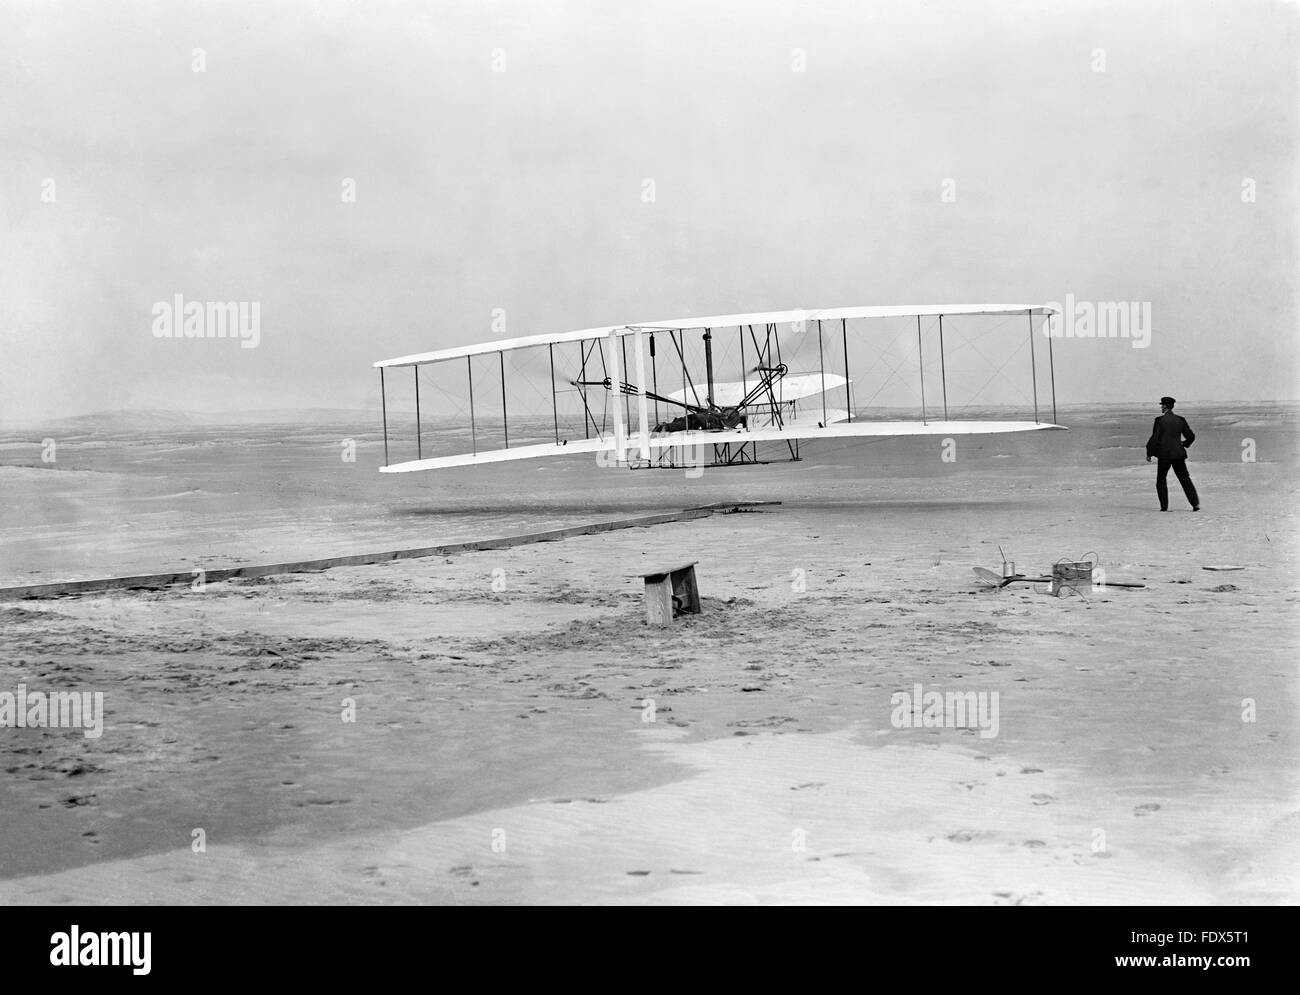 Wright Flyer I. Wright brothers first powered flight in the Wright Flyer at Kill Devil Hills, Kitty Hawk, North Carolina on 17th December 1903. Stock Photo